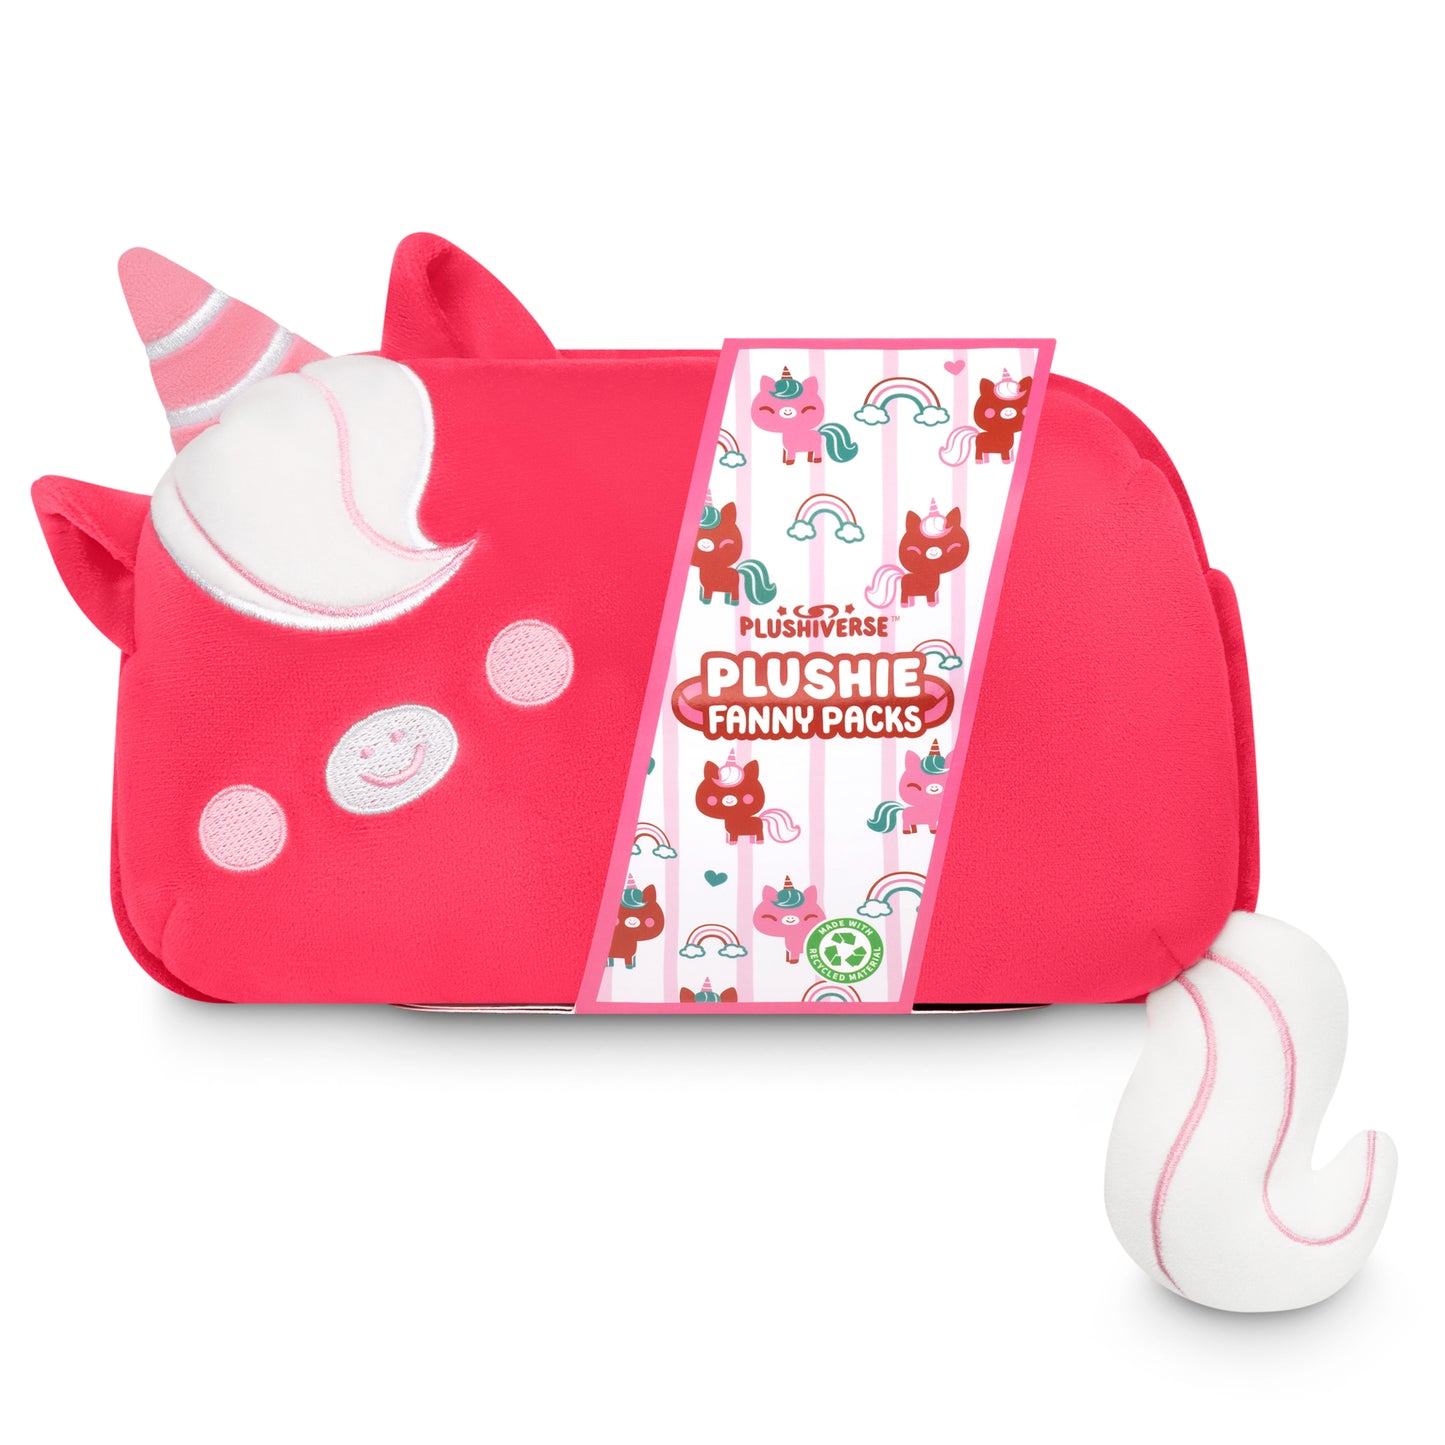 A Plushiverse Ruby Red Unicorn Plushie Fanny Pack, adorned with a unicorn, offering hands-free functionality with an adjustable belt, made by TeeTurtle.